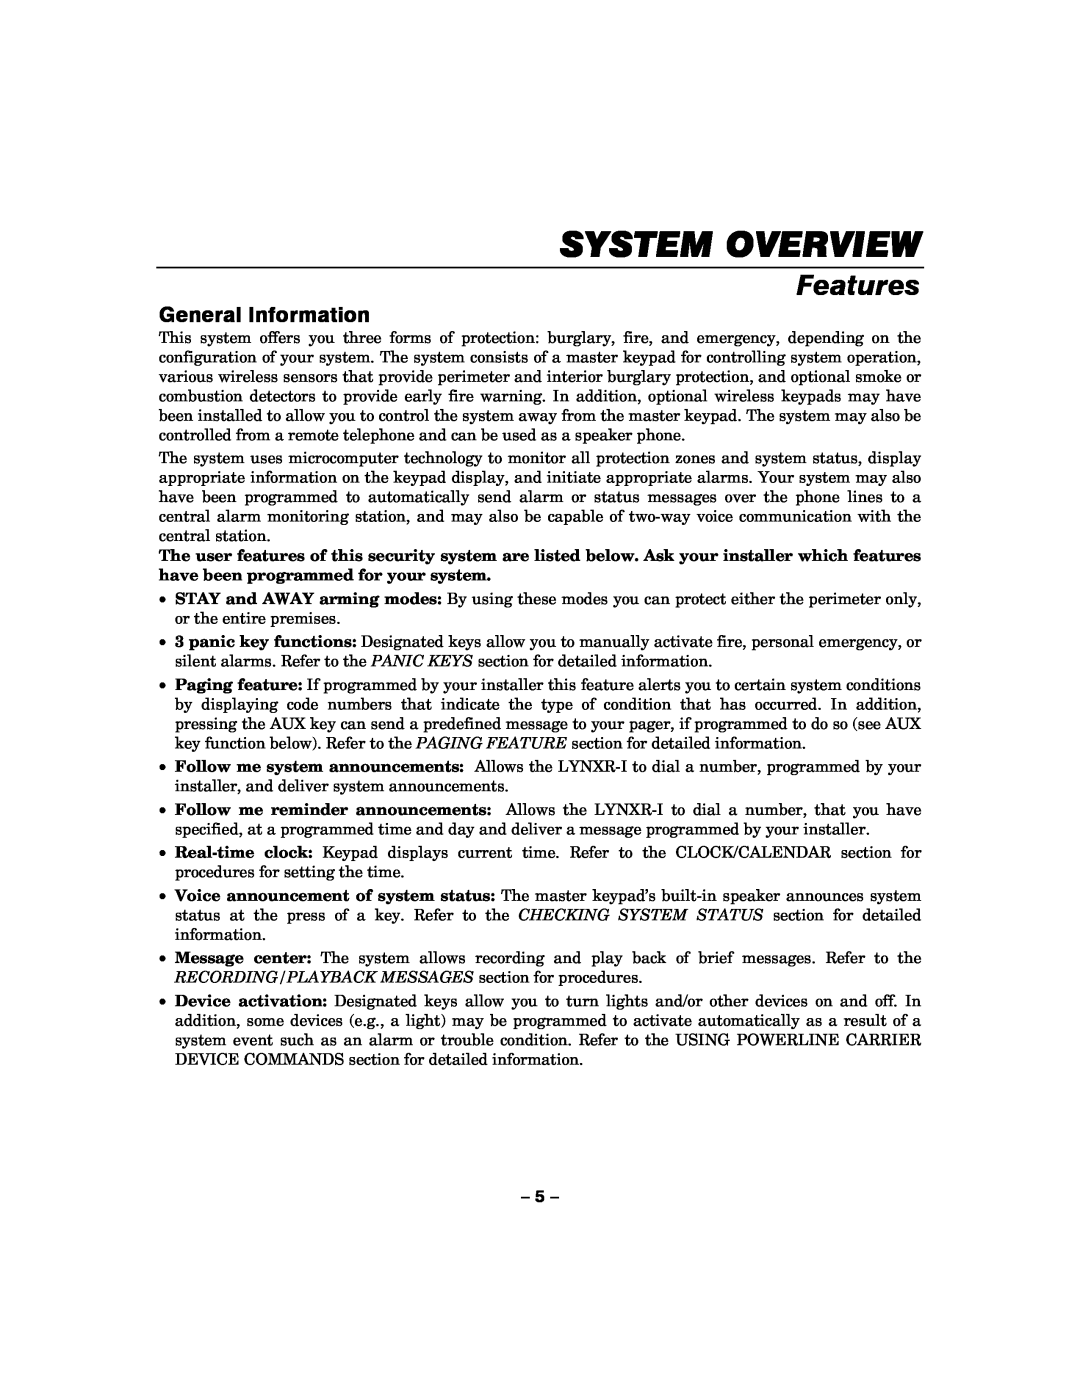 Honeywell LYNXR-I manual System Overview, Features, General Information 